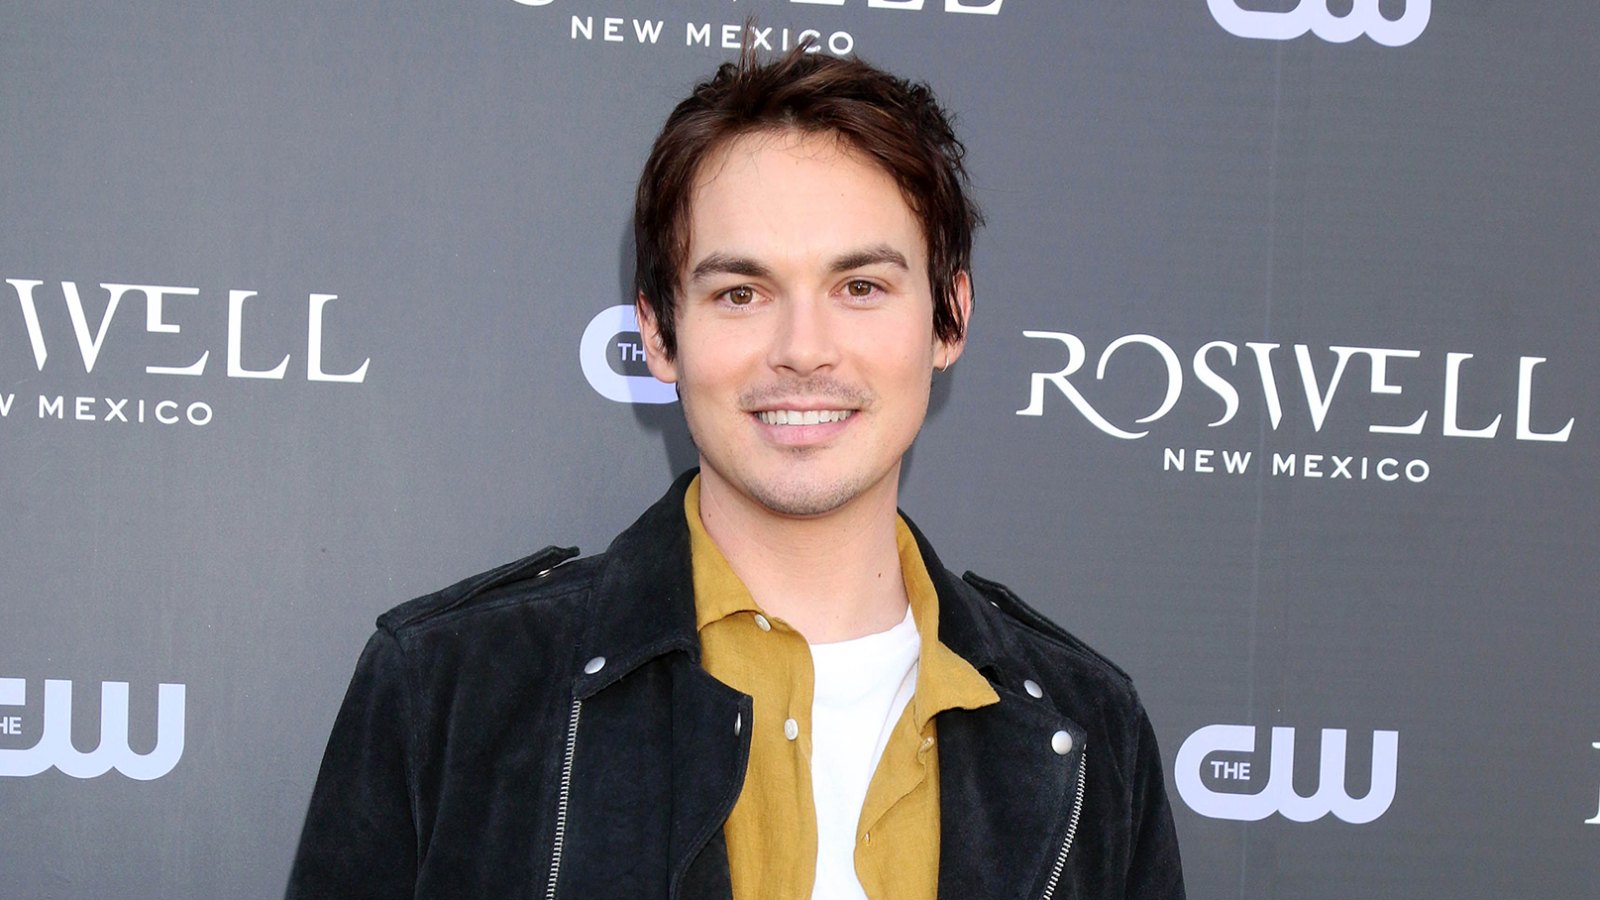 Tyler Blackburn Says Intense Mental Health Issues Led to Him Stepping Back From Roswell New Mexico